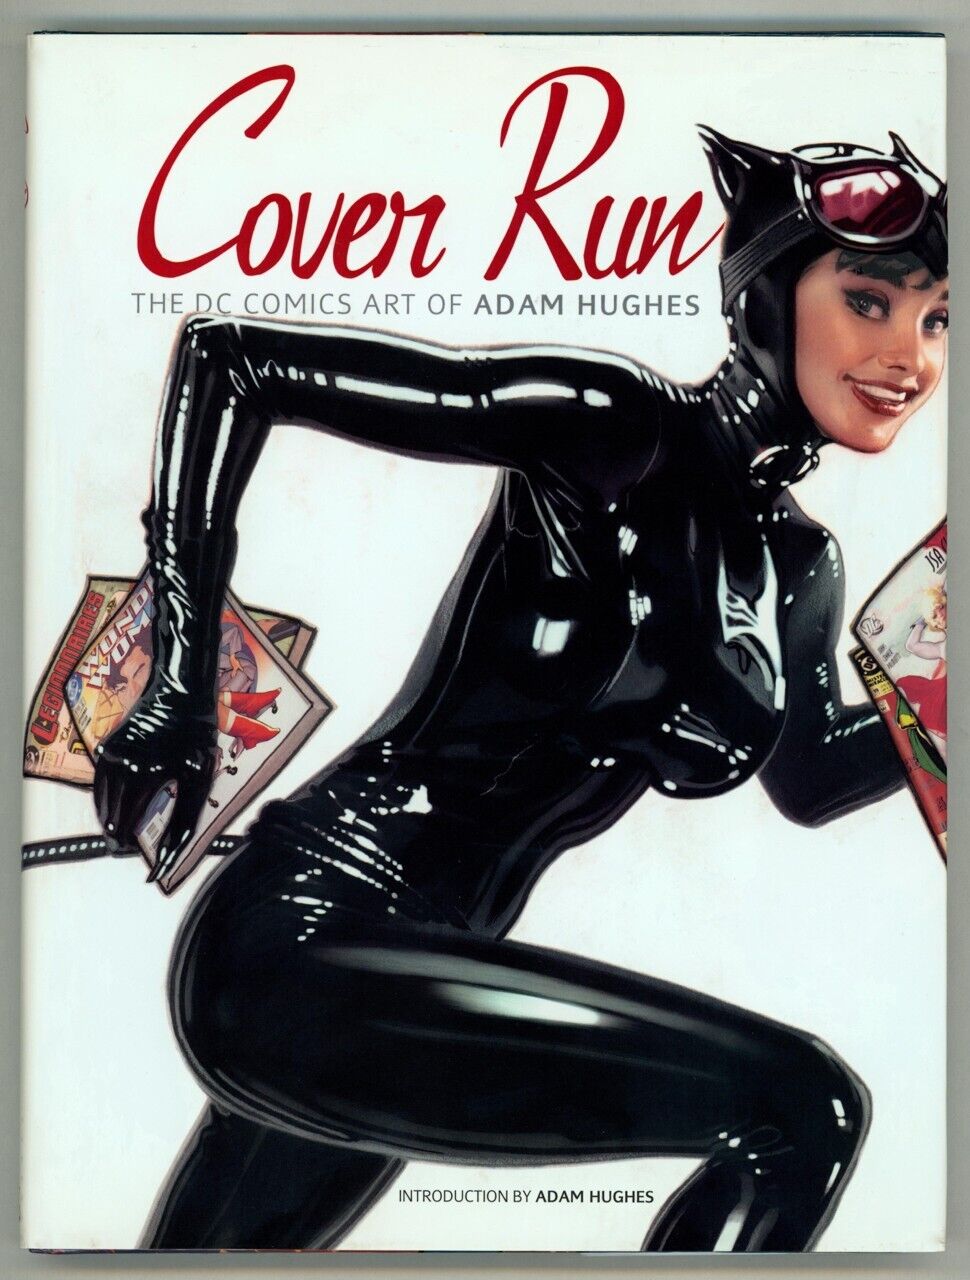 Doug Sneyd Collection Copy ~ Adam Hughes Cover Run 2010 SDCC Signed Edt Catwoman